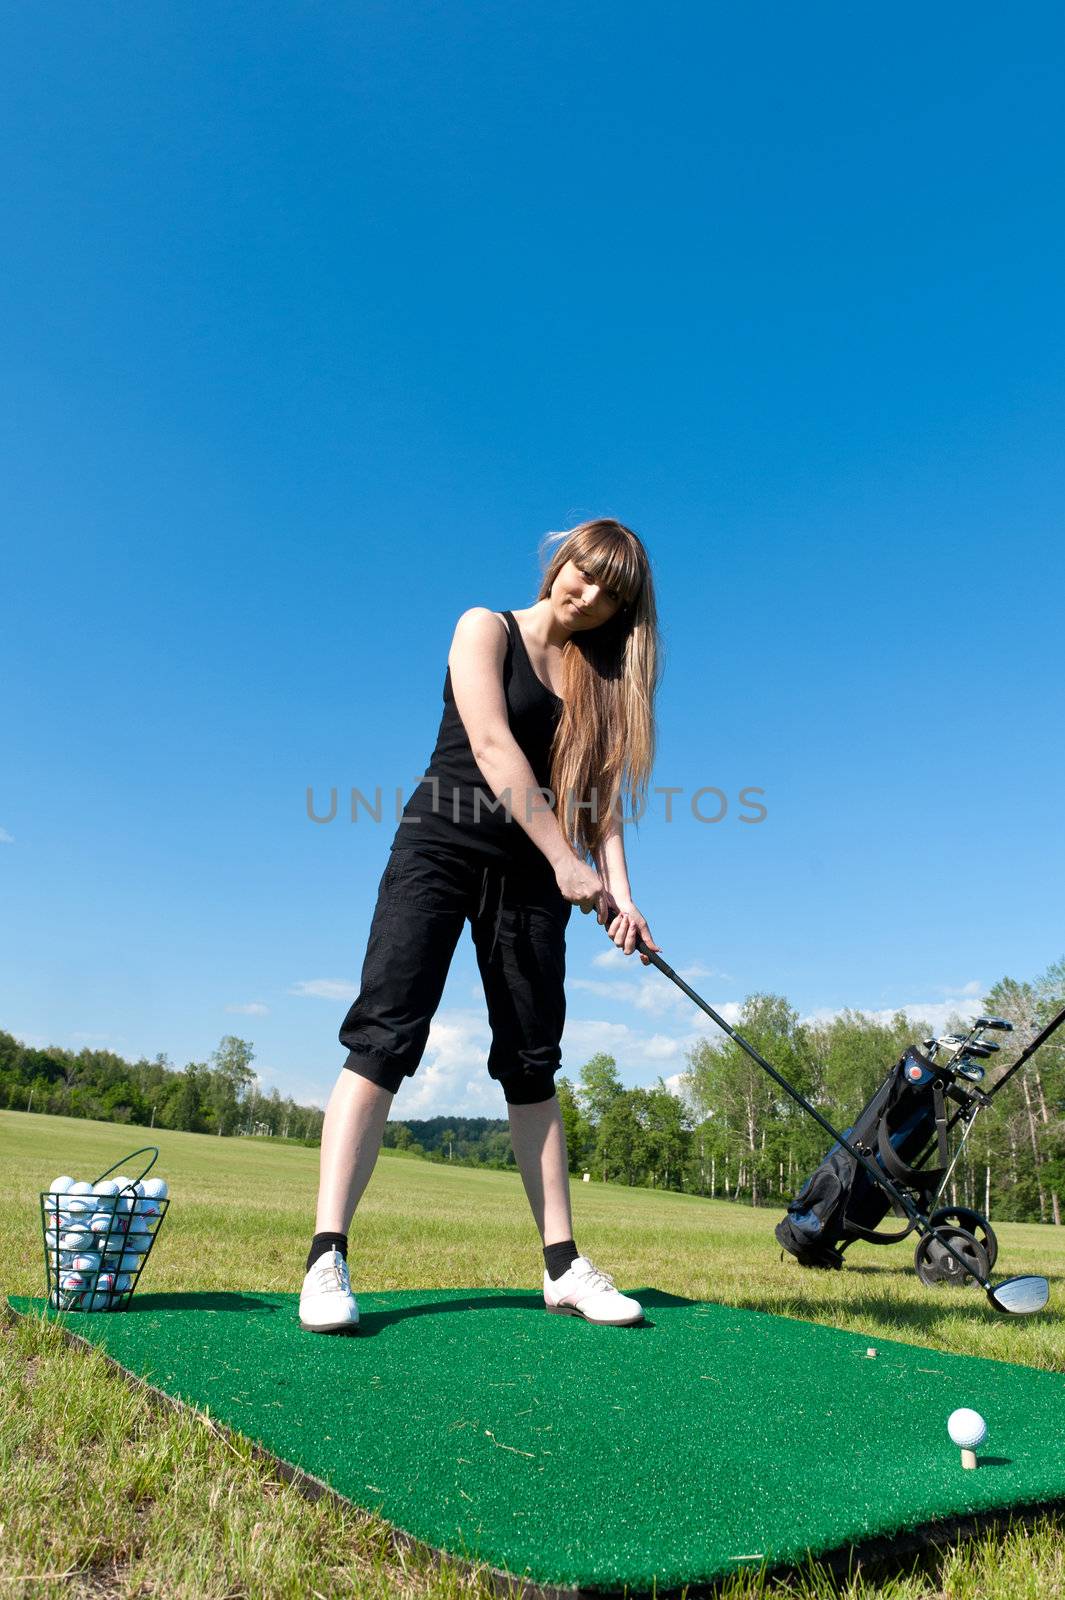 Woman about to strike golf ball on green field